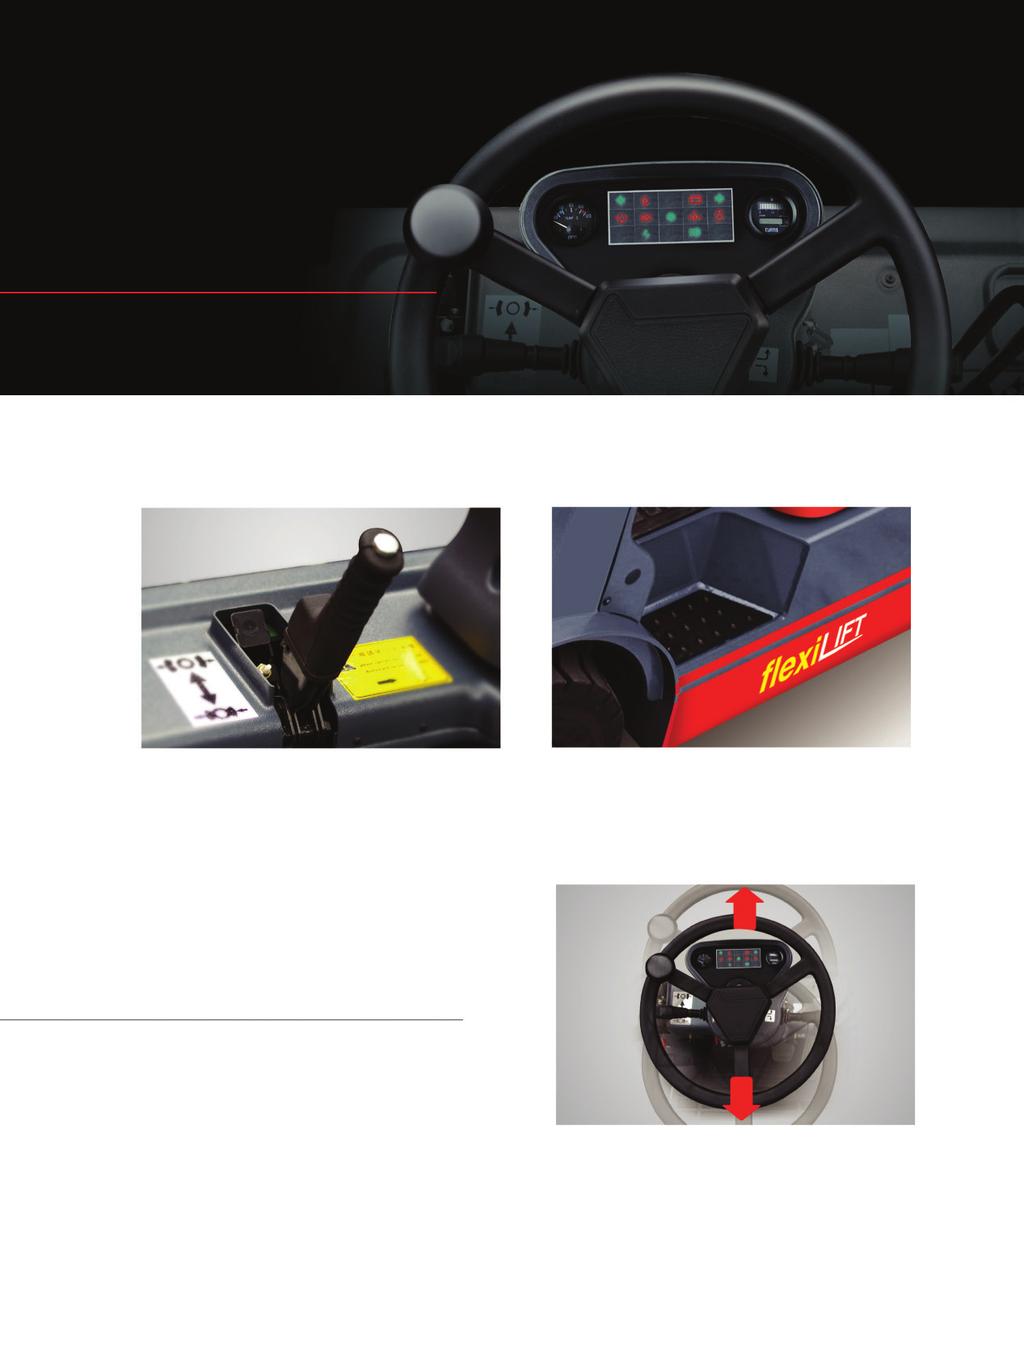 Steering wheel with assist knob The steering wheel improves vehicle manoeuvrability while simplifying operator entry and exit to the cab.